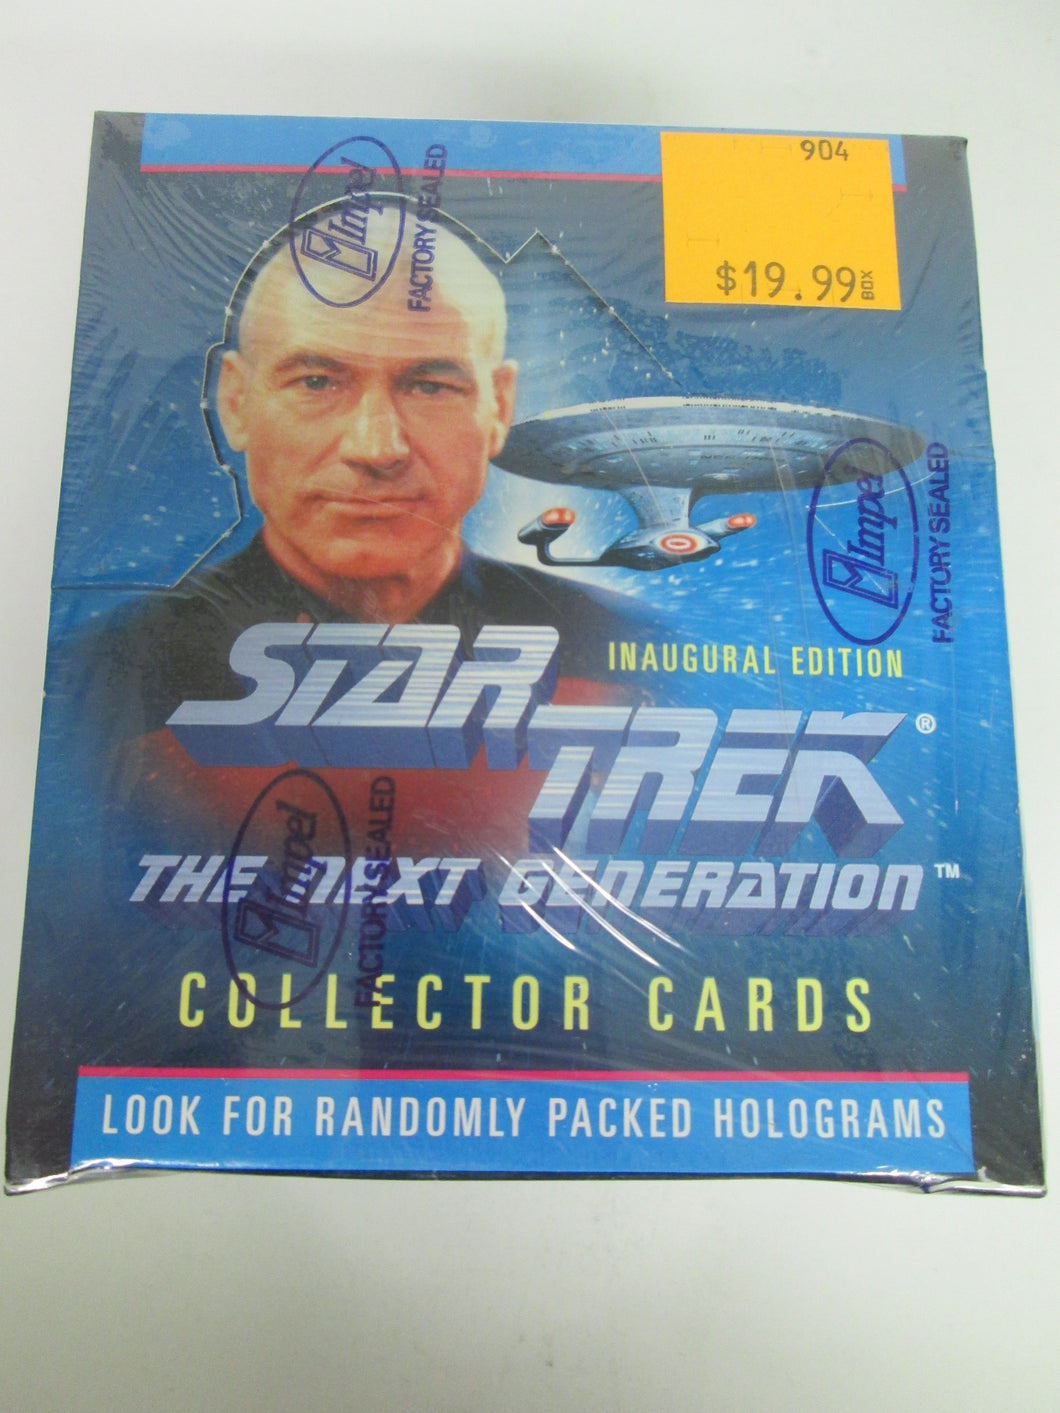 Star Trek The Next Generation Inaugural Edition Collector Cards Sealed Box 1992